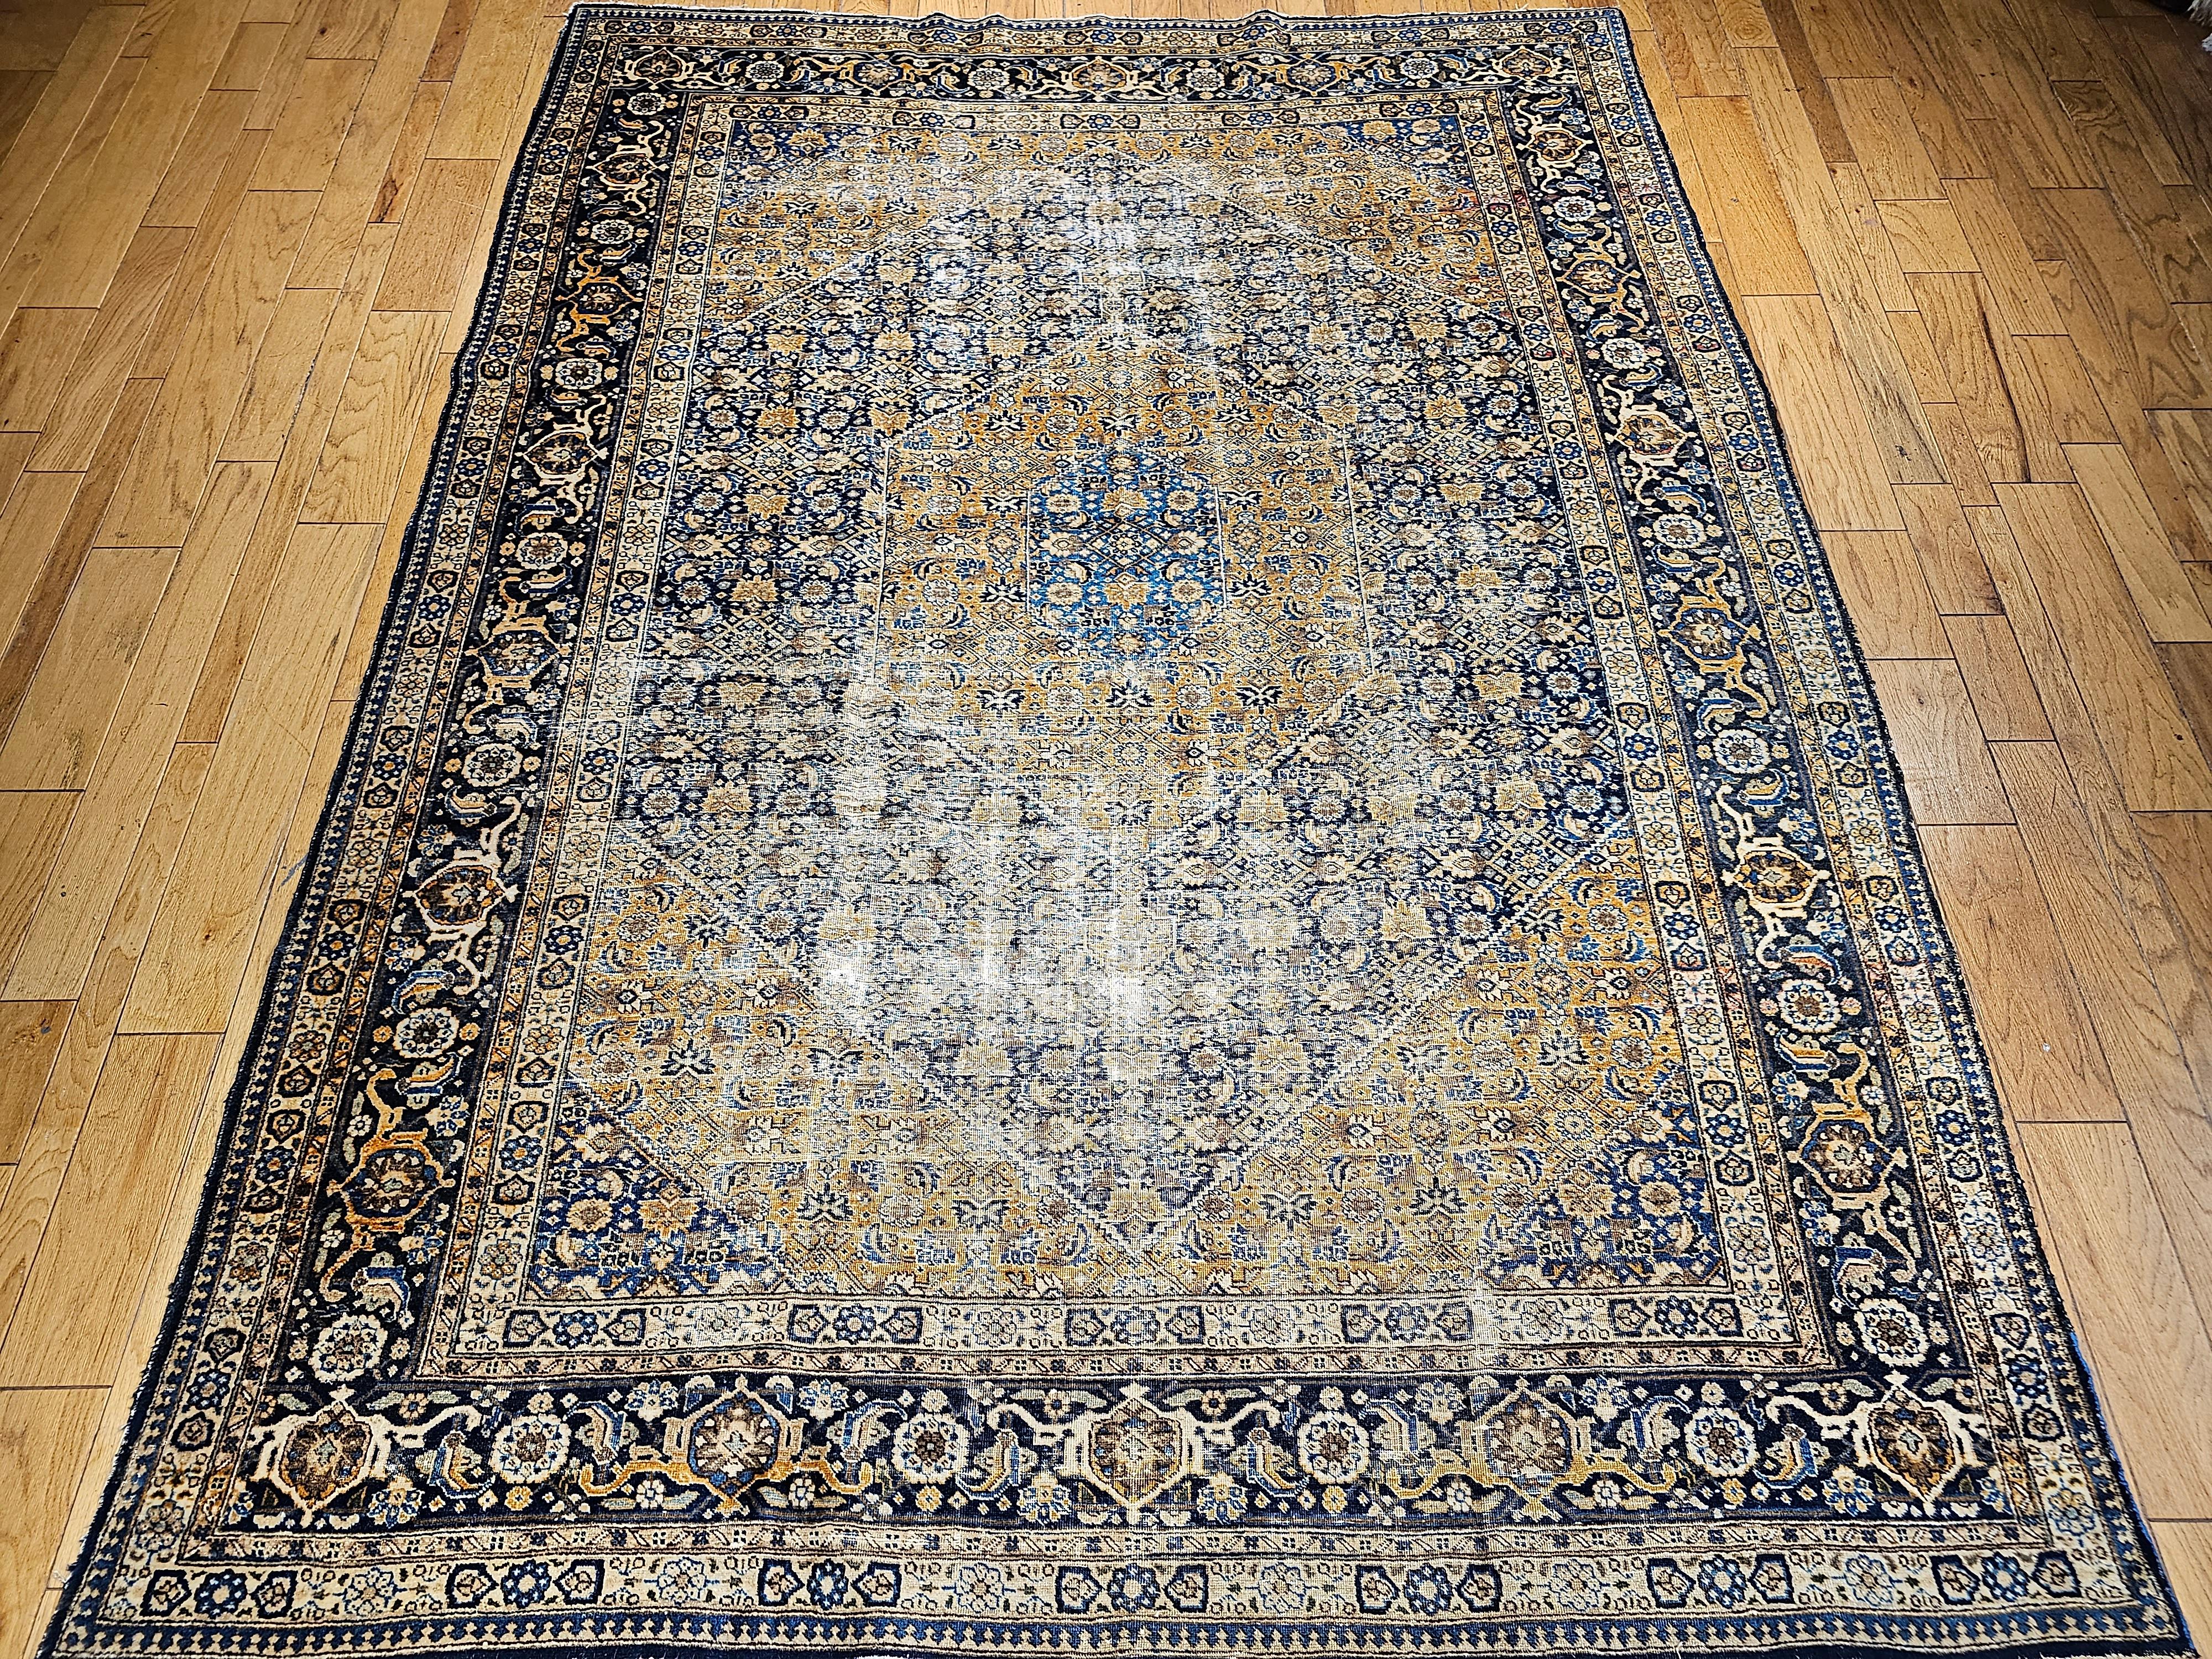 A Persian Tabriz rug from the early 1900s with a medallion Herati design.  The beautiful all-over Herati pattern is set in an abrash Navy blue background color with the corner spandrels in a combination of antique Camel and French blue colors.  The